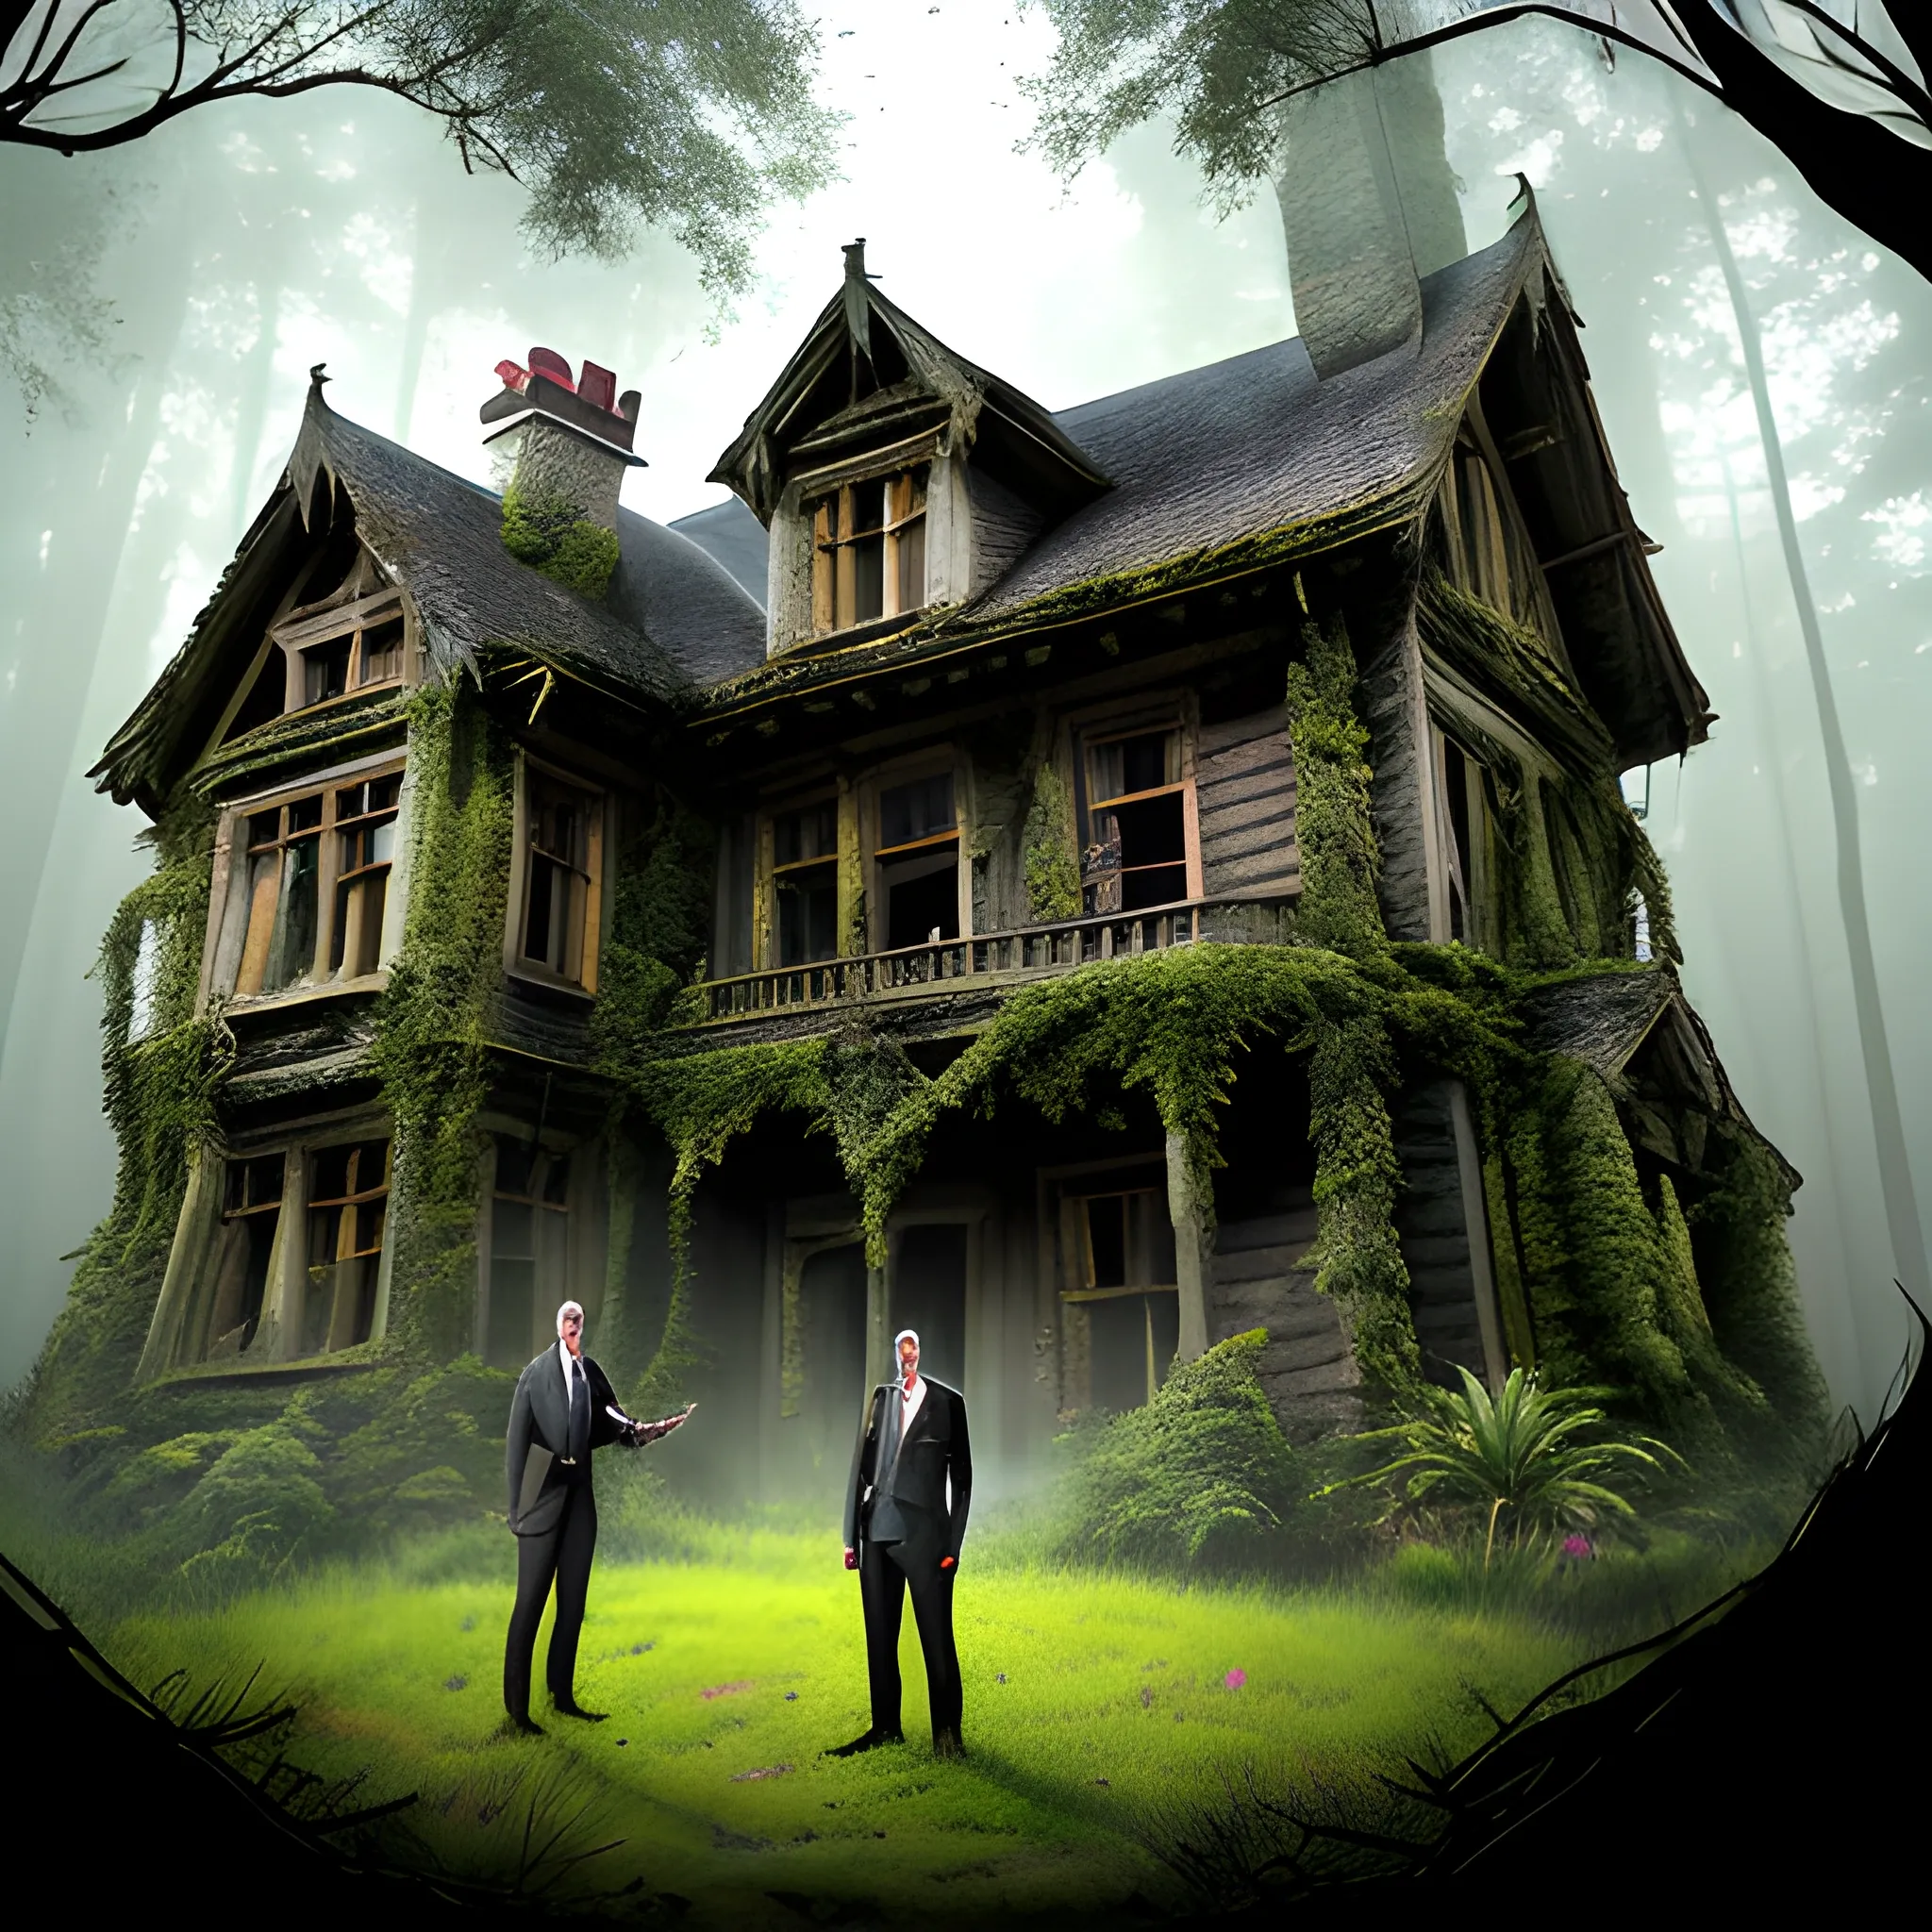 Description: Four children (two boys and two girls) standing at the edge of a dense forest, looking curiously and cautiously at an old, eerie house that appears between the trees.
Style:

    Realistic: Detailed depiction of the trees, house, and children with realistic clothing and facial expressions.
    Cartoon: Bright colors, simplified details, exaggerated facial expressions.
    Fantasy: Foggy colors, trees that seem to move, the house appearing as if it's alive.
